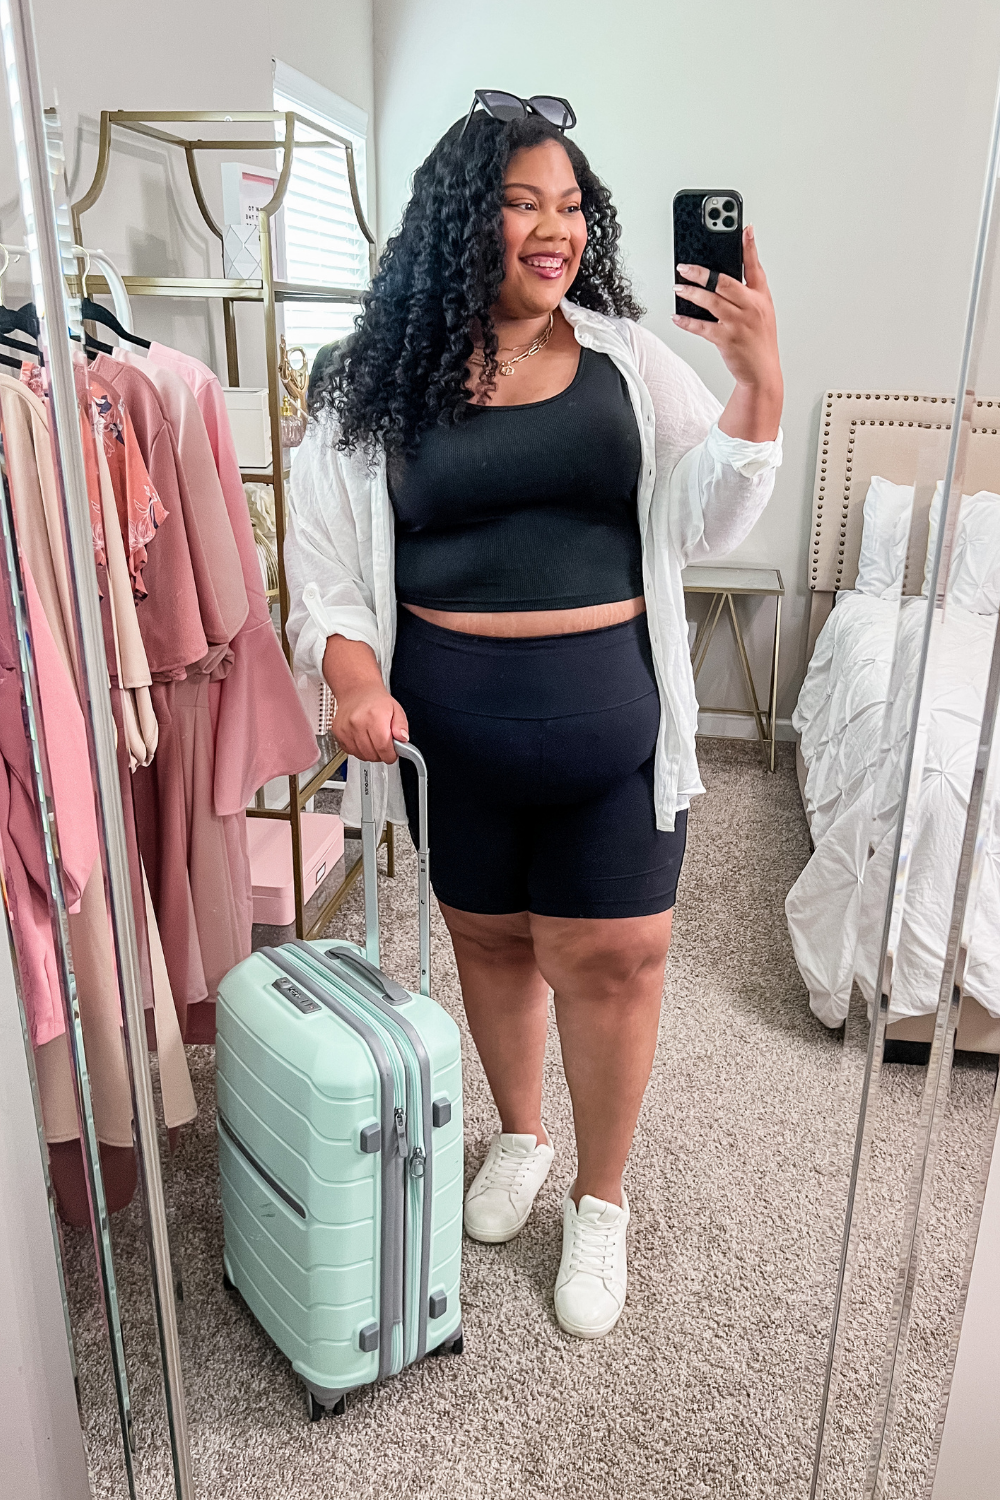 7 Stylish airplane outfits + inspo for comfy women's travel